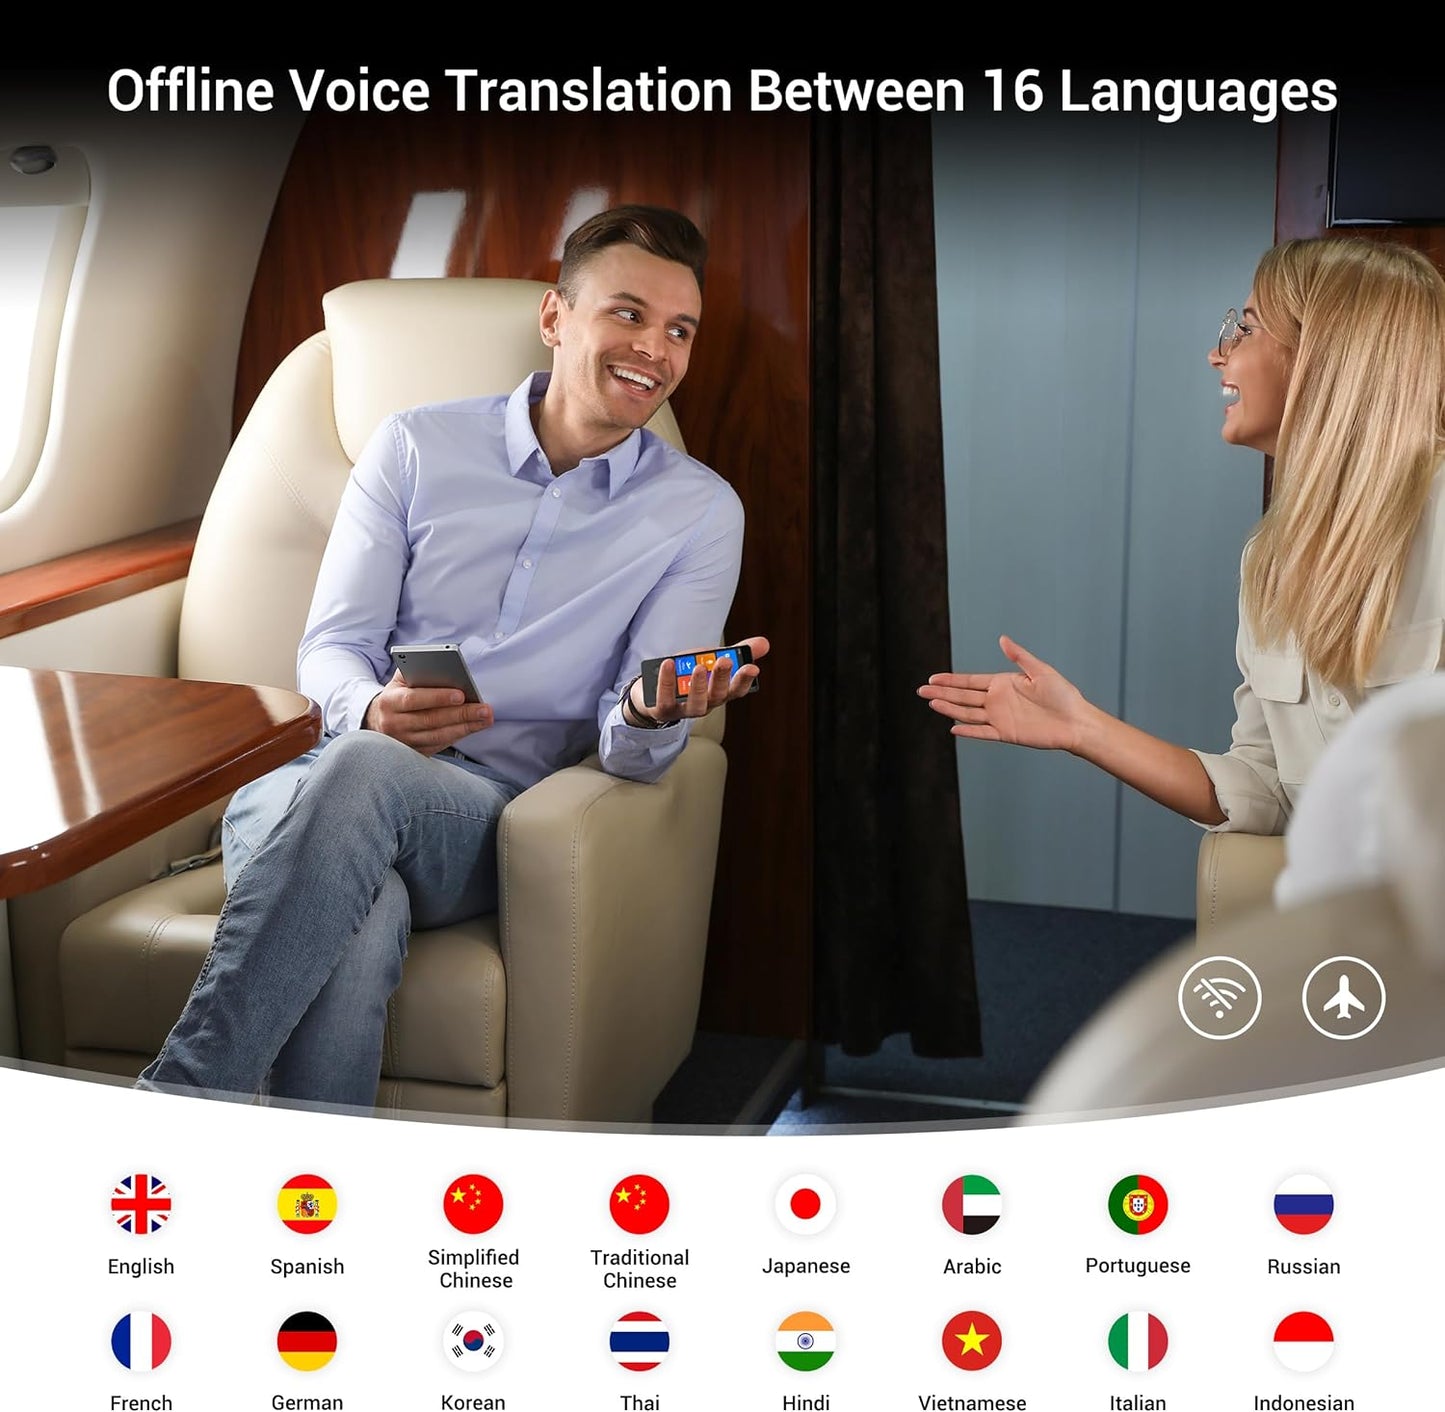 ANFIER Language Translator Device Updated Offline Translator in 16 Languages Online for 144 Languages 97% High Accuracy for Travel Business